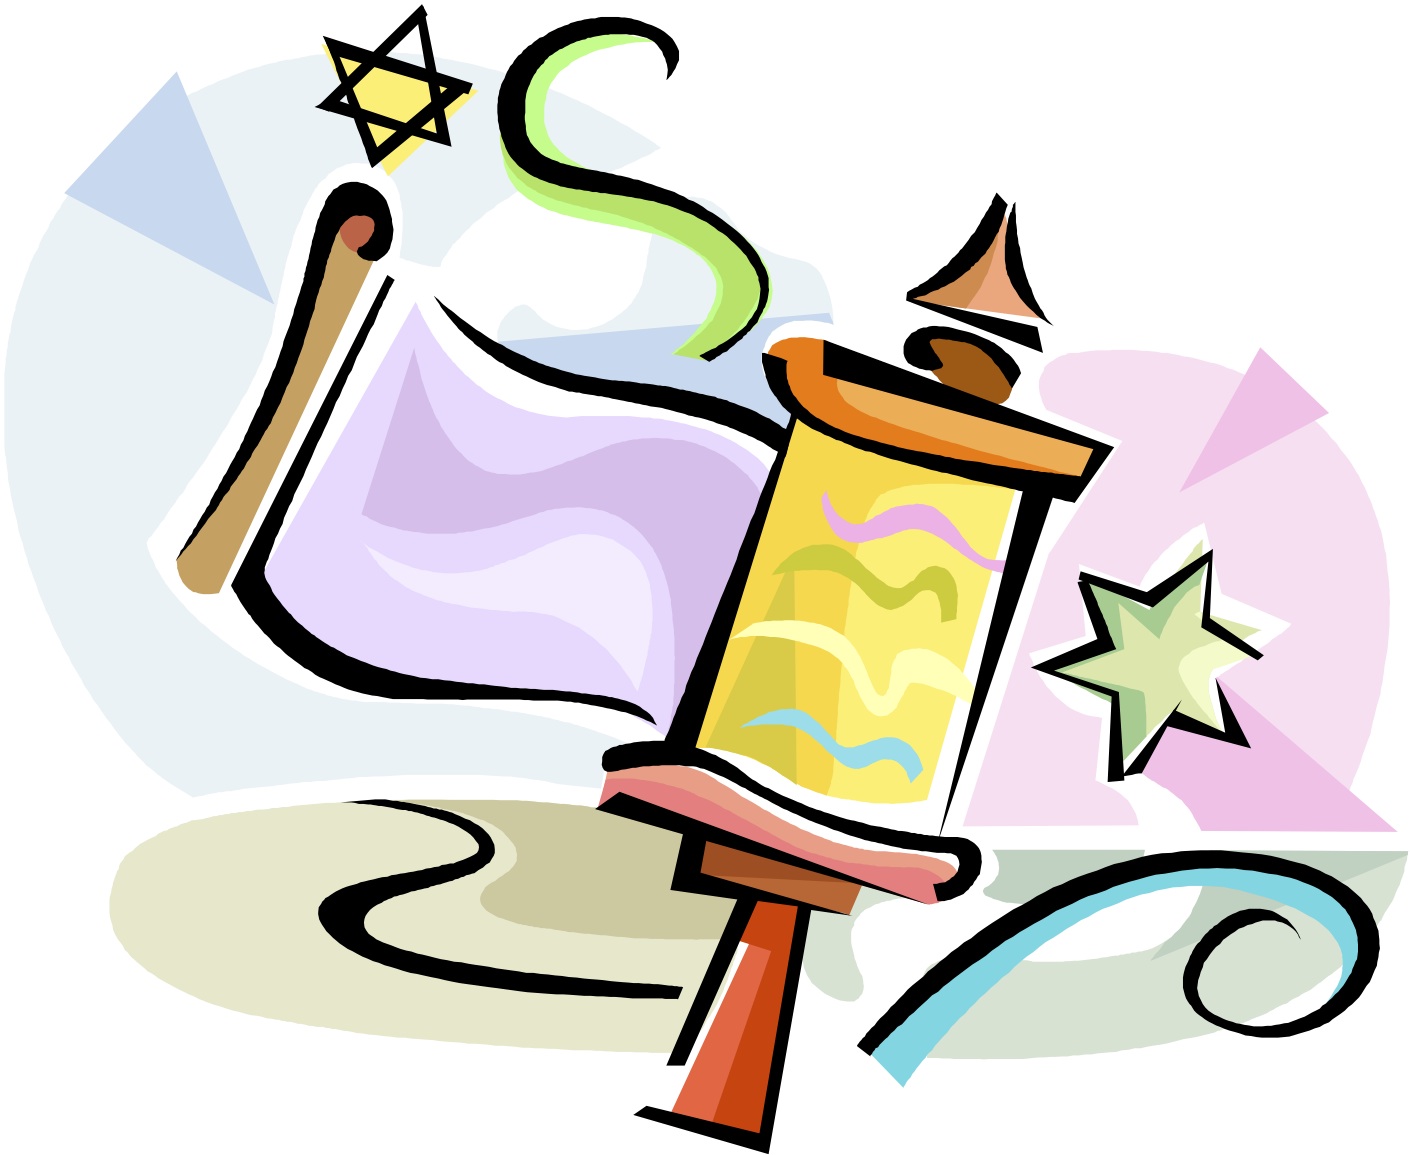 Passover Clip Art Free - Free Clipart Images